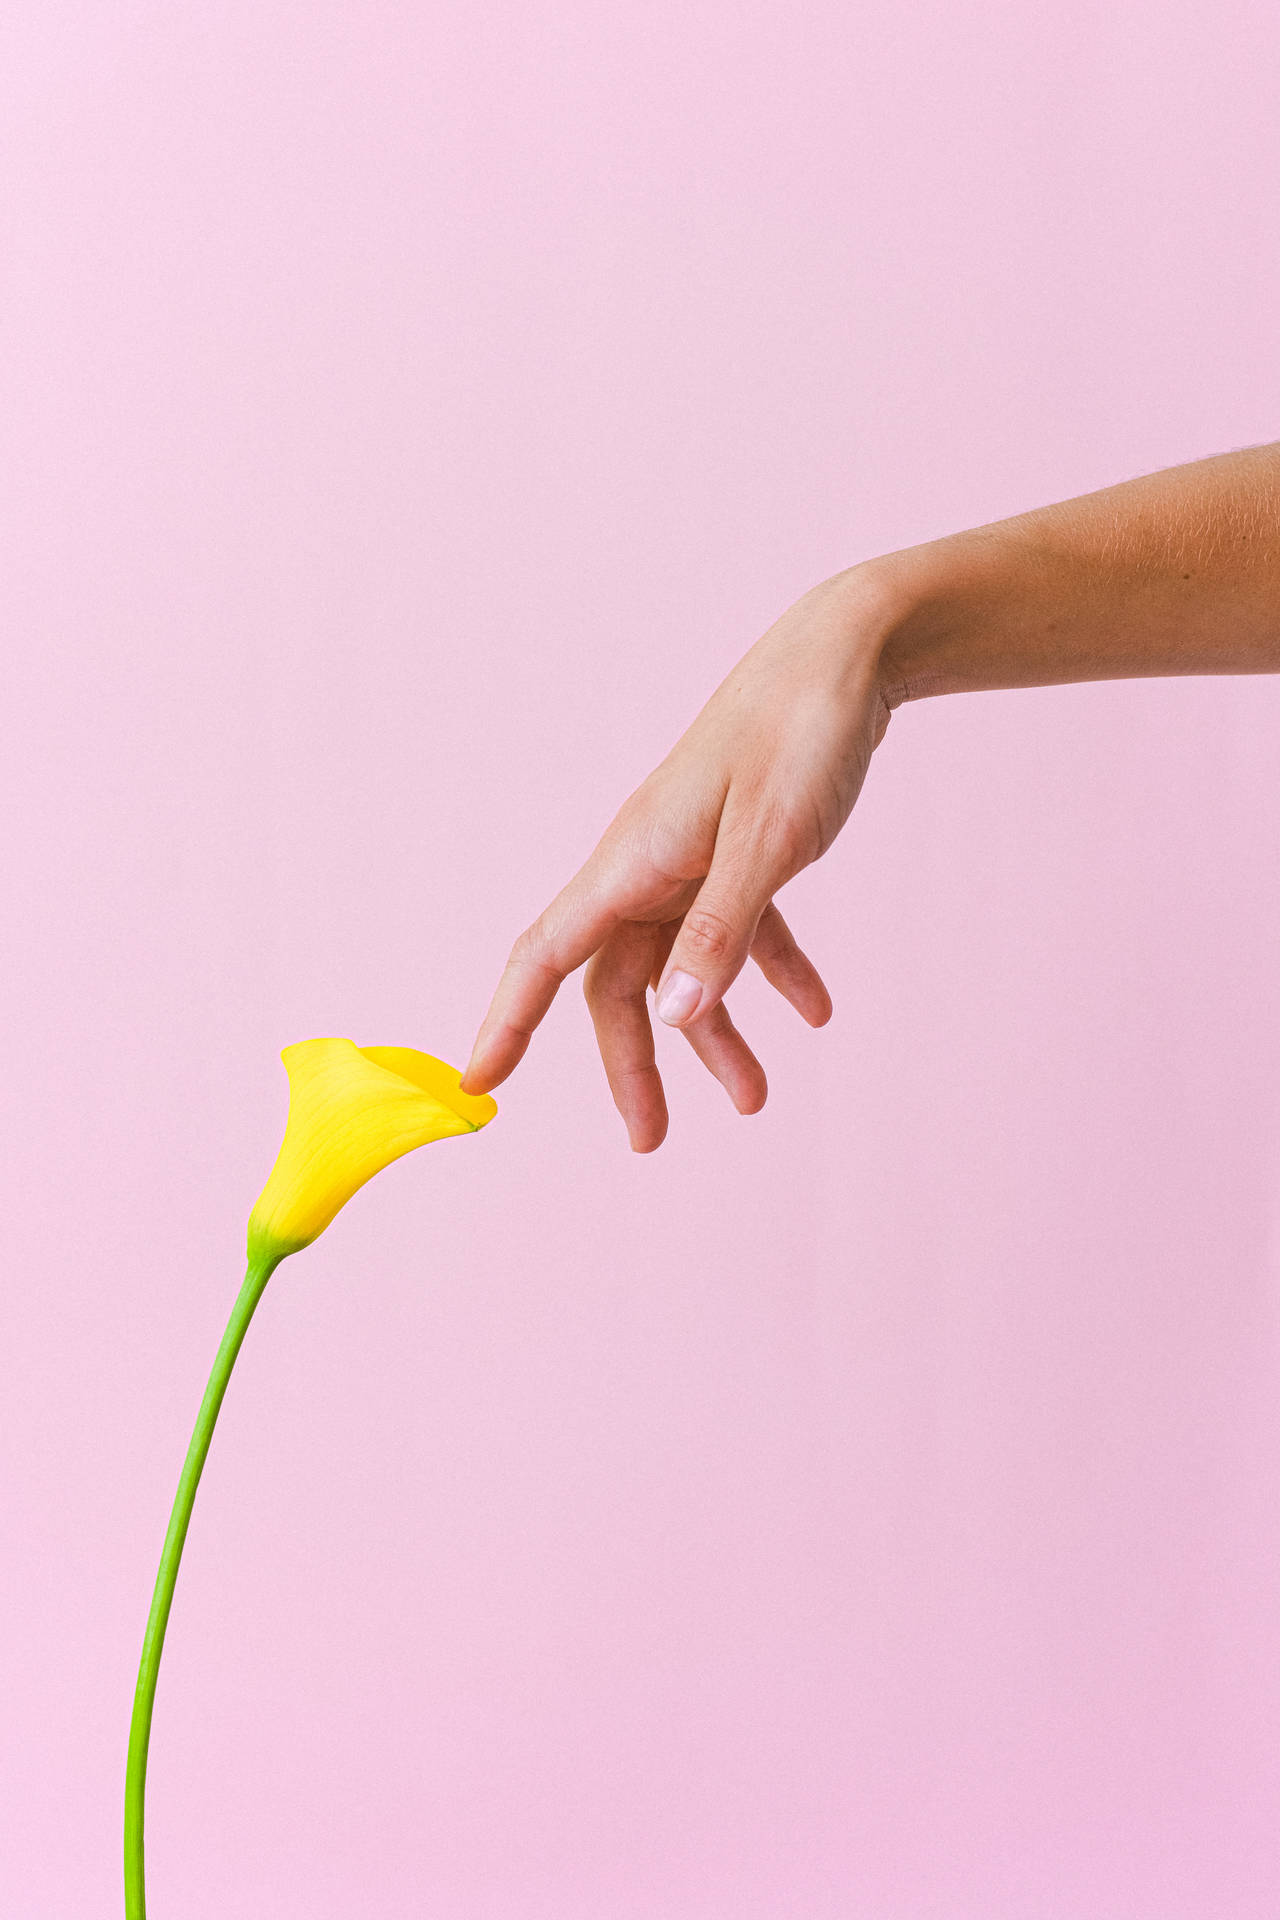 Pink Background With Yellow Flower